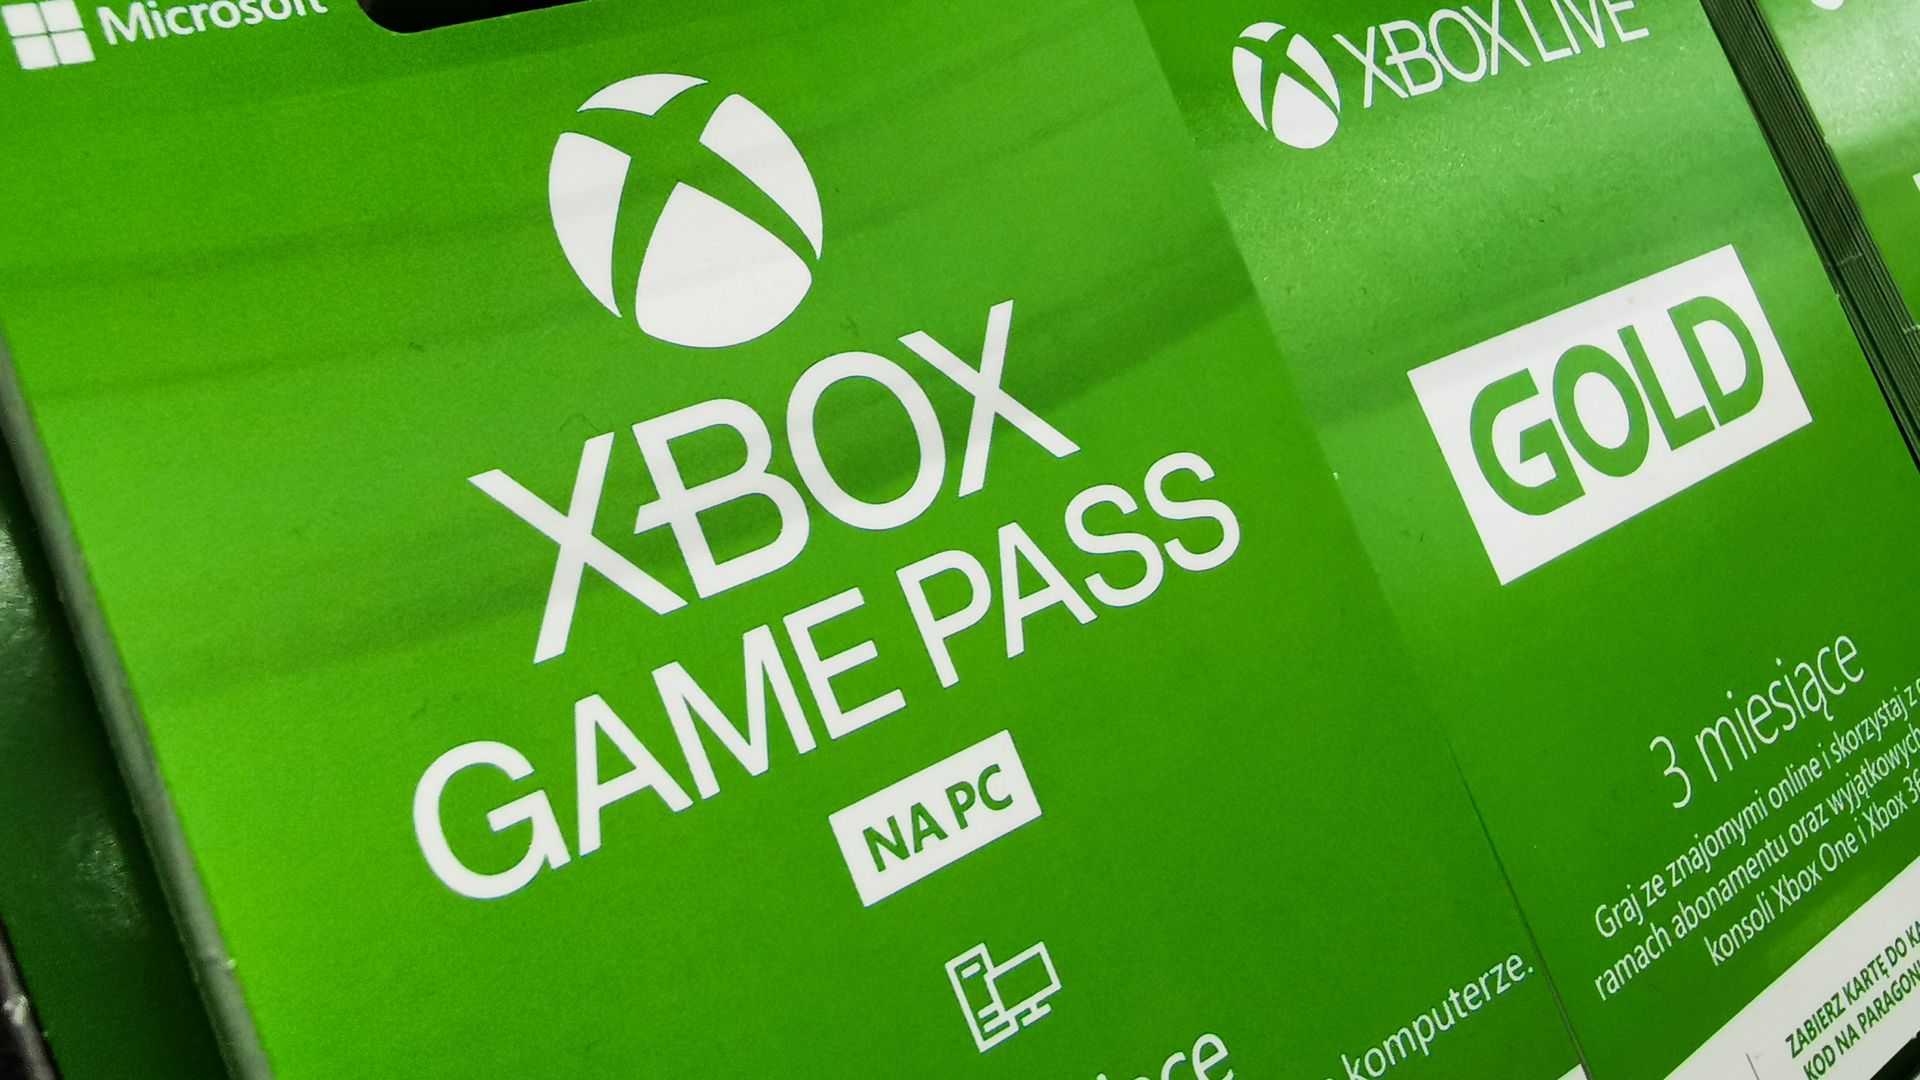 Xbox game pass gift cards are seen in a store in Krakow, Poland on August 26, 2021